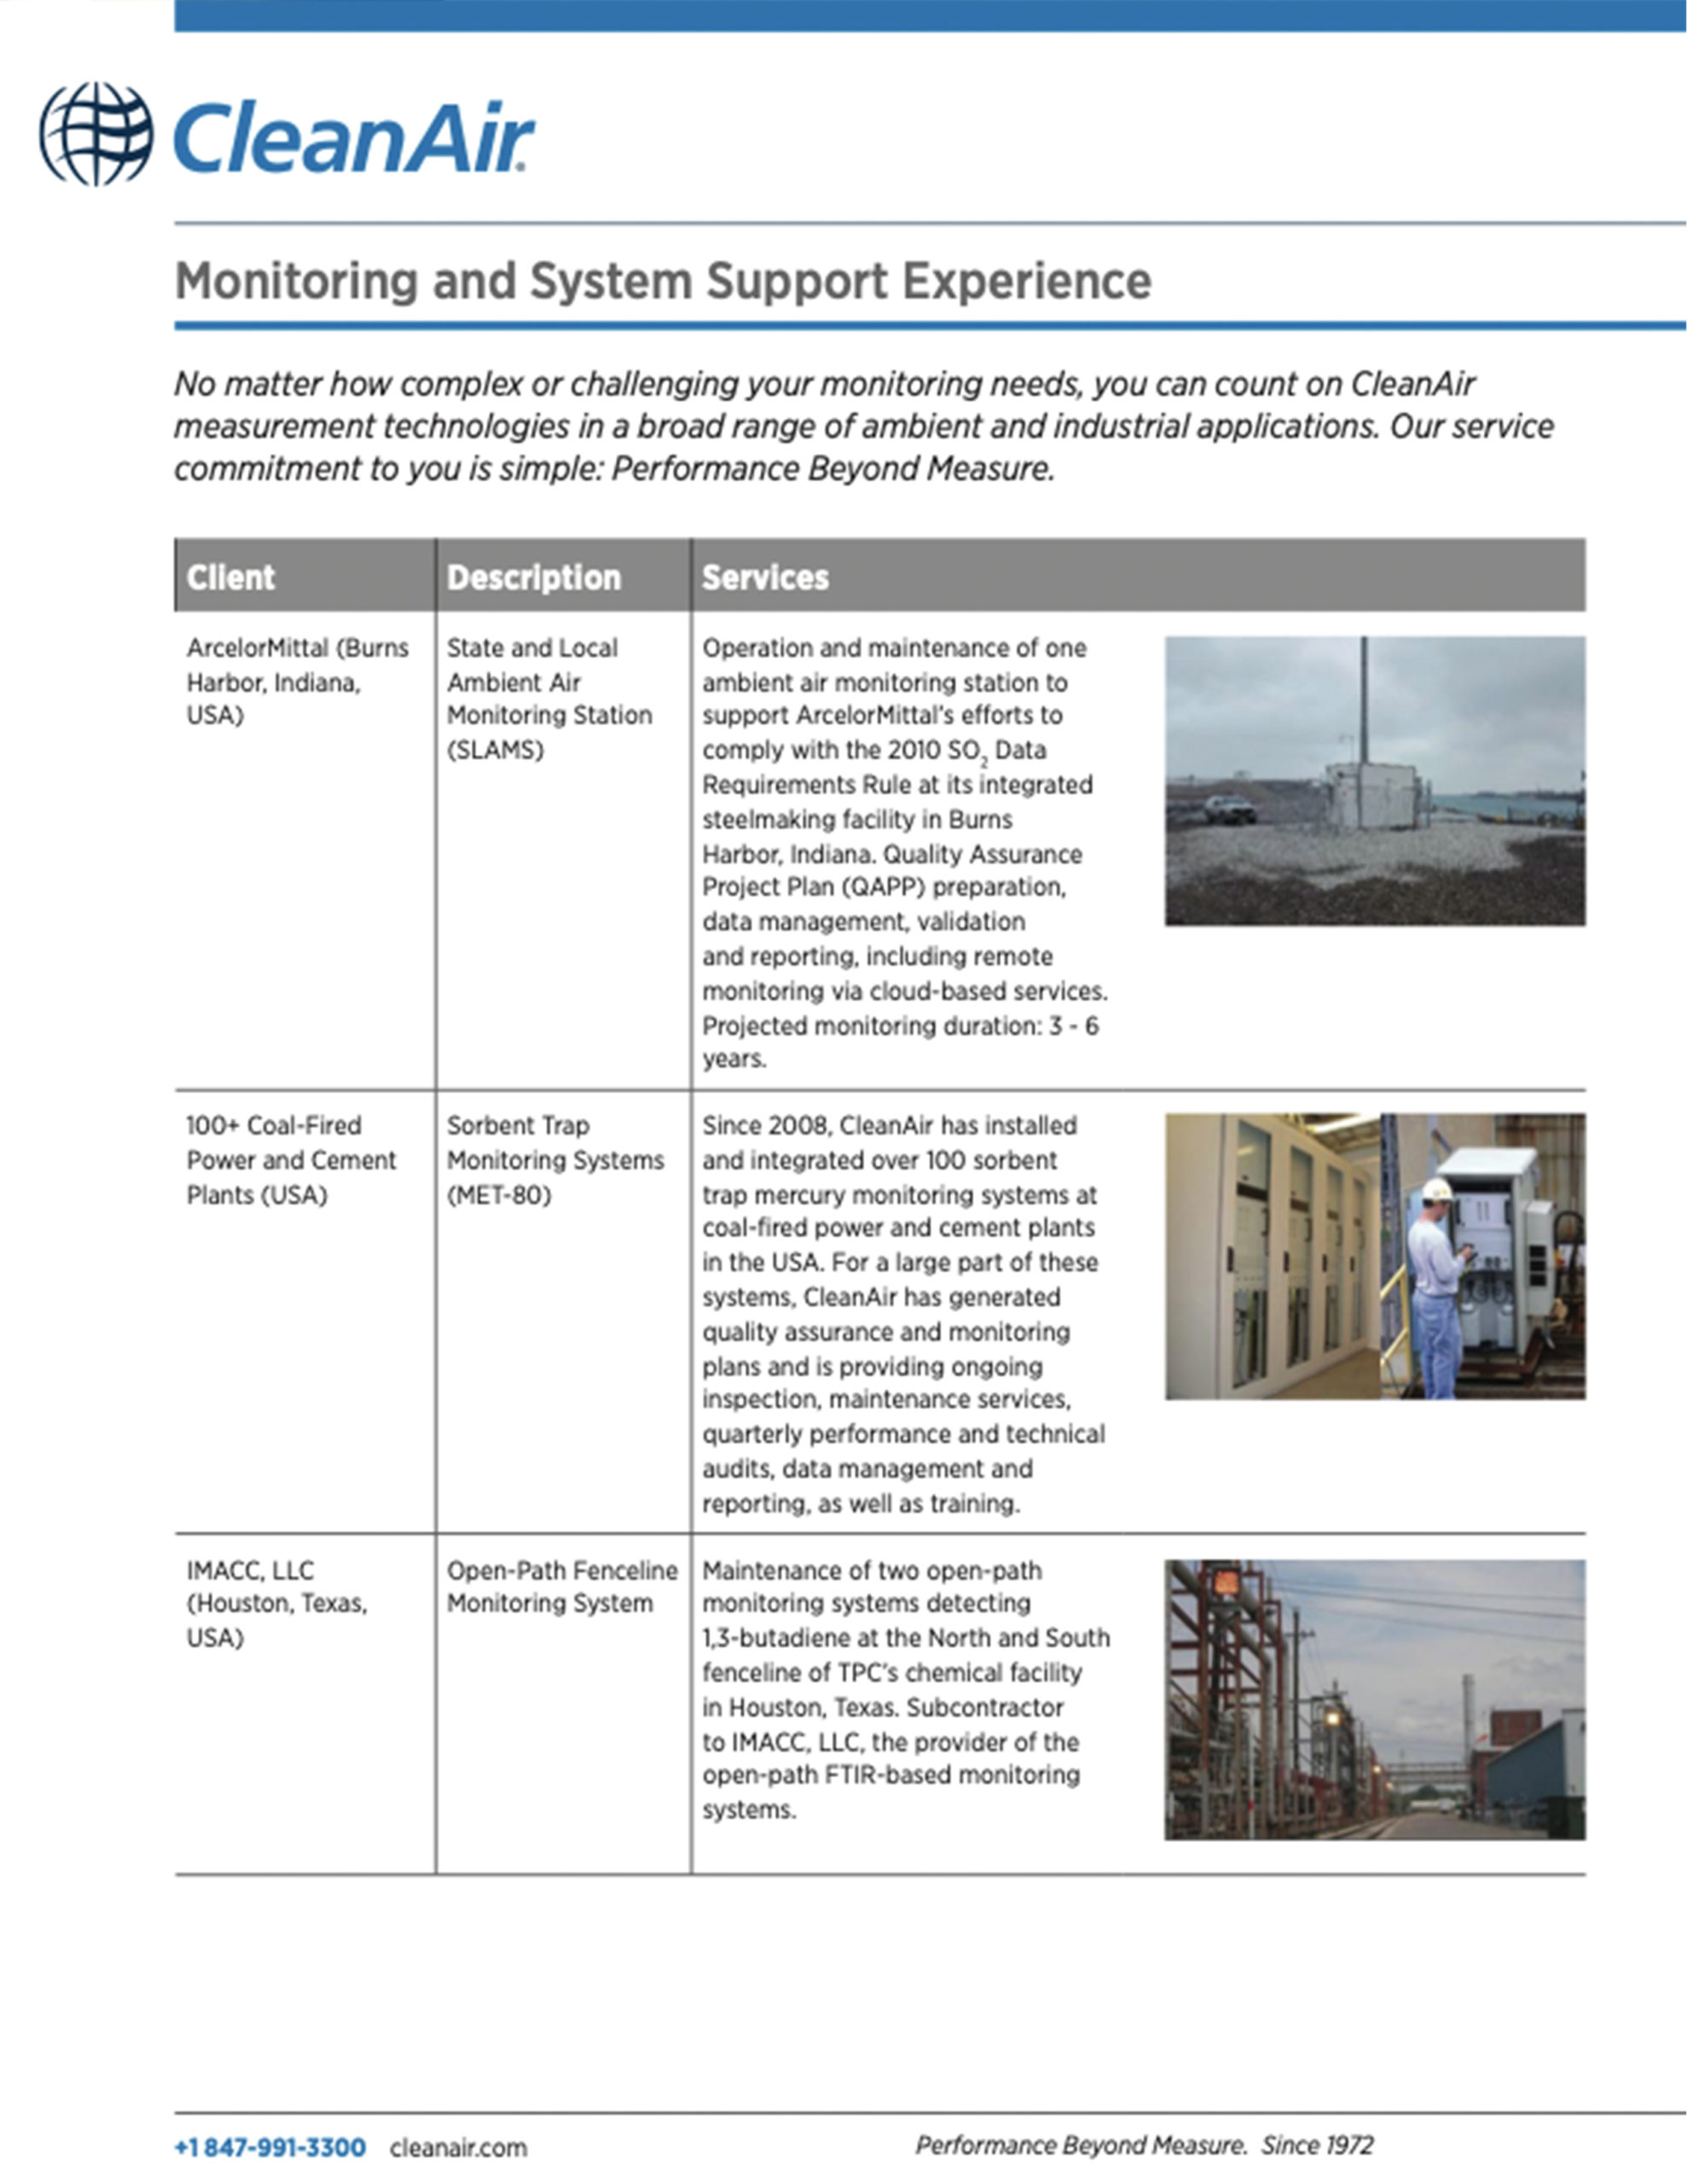 CleanAir Monitoring and System Support Experience